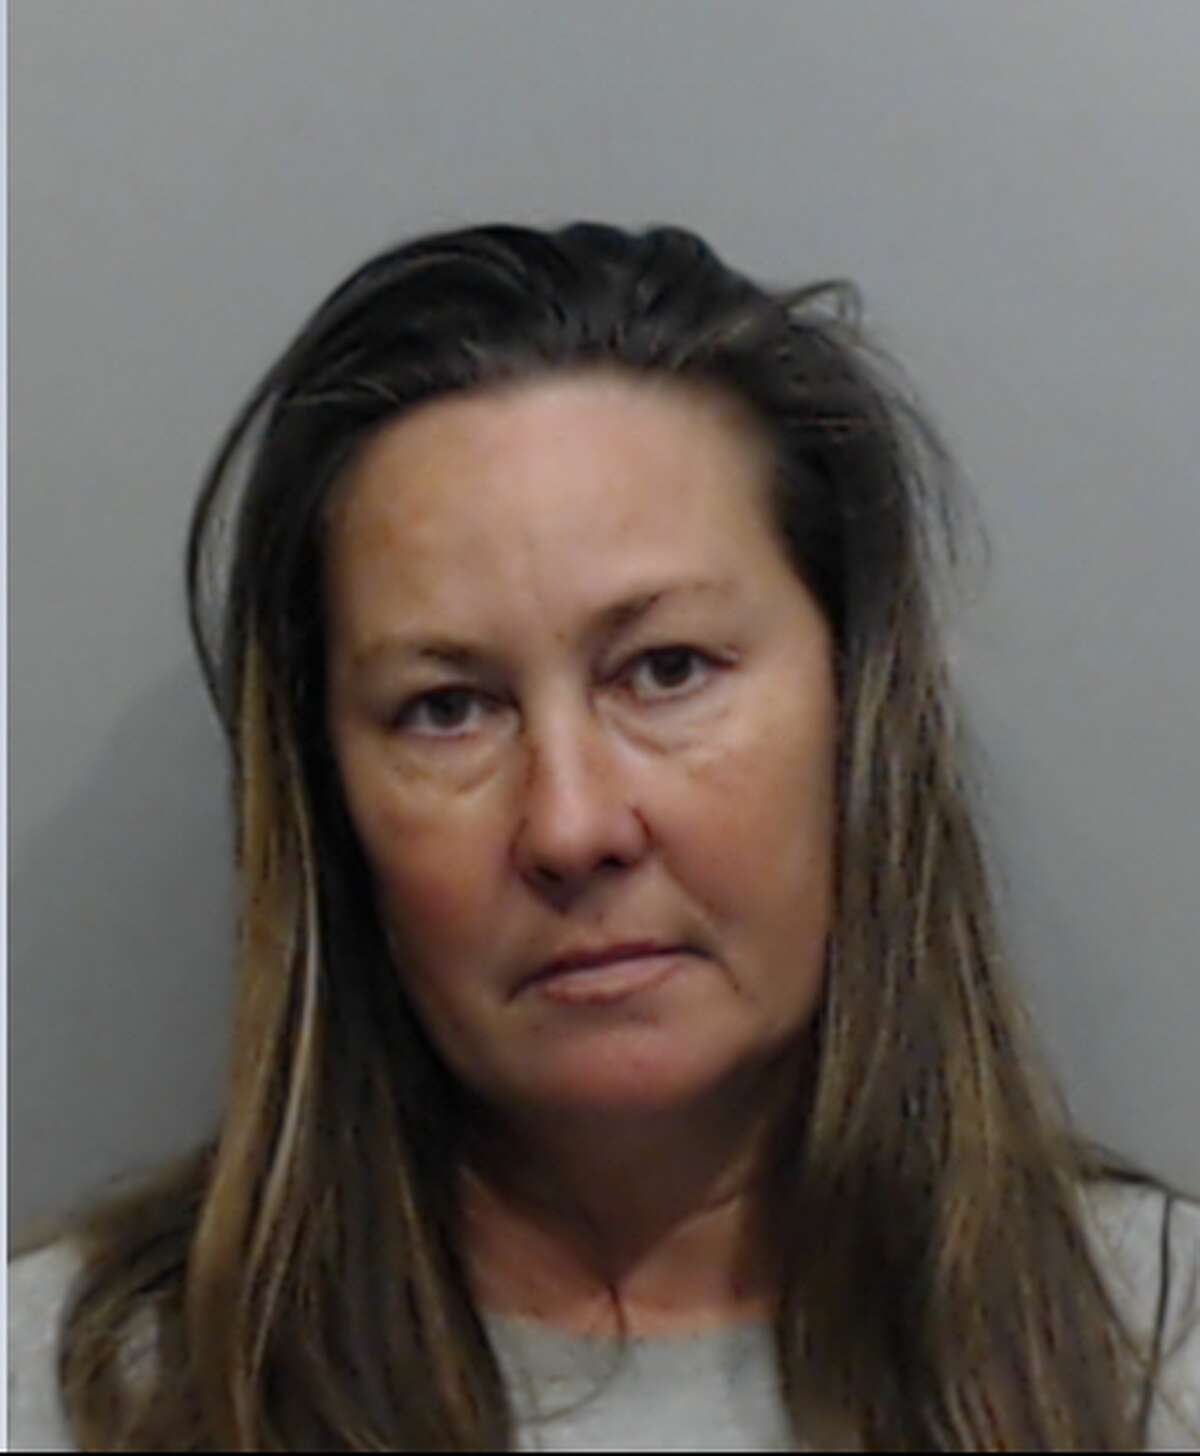 Melissa Caffey, 47, is facing two counts of child endangerment and 10 counts of animal cruelty.